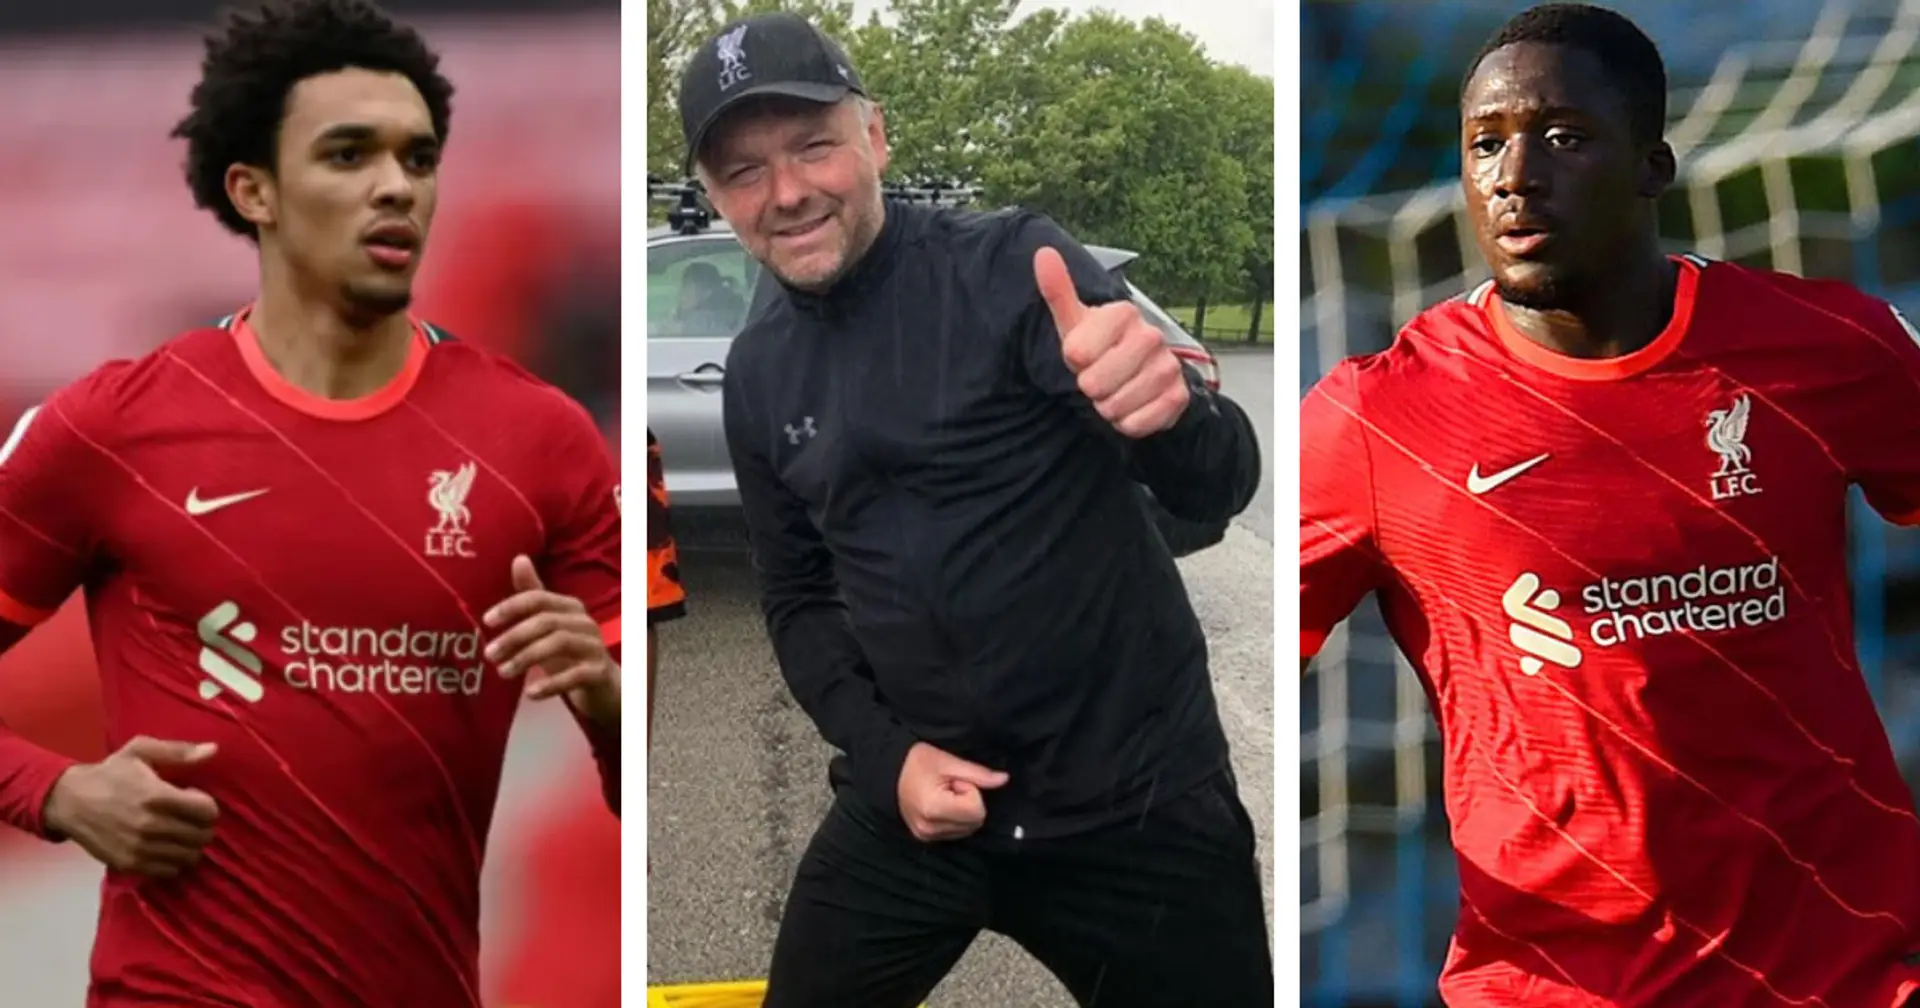 'I'd love to help Trent and Konate': Sprint coach who helped Foden details how LFC stars can become quicker